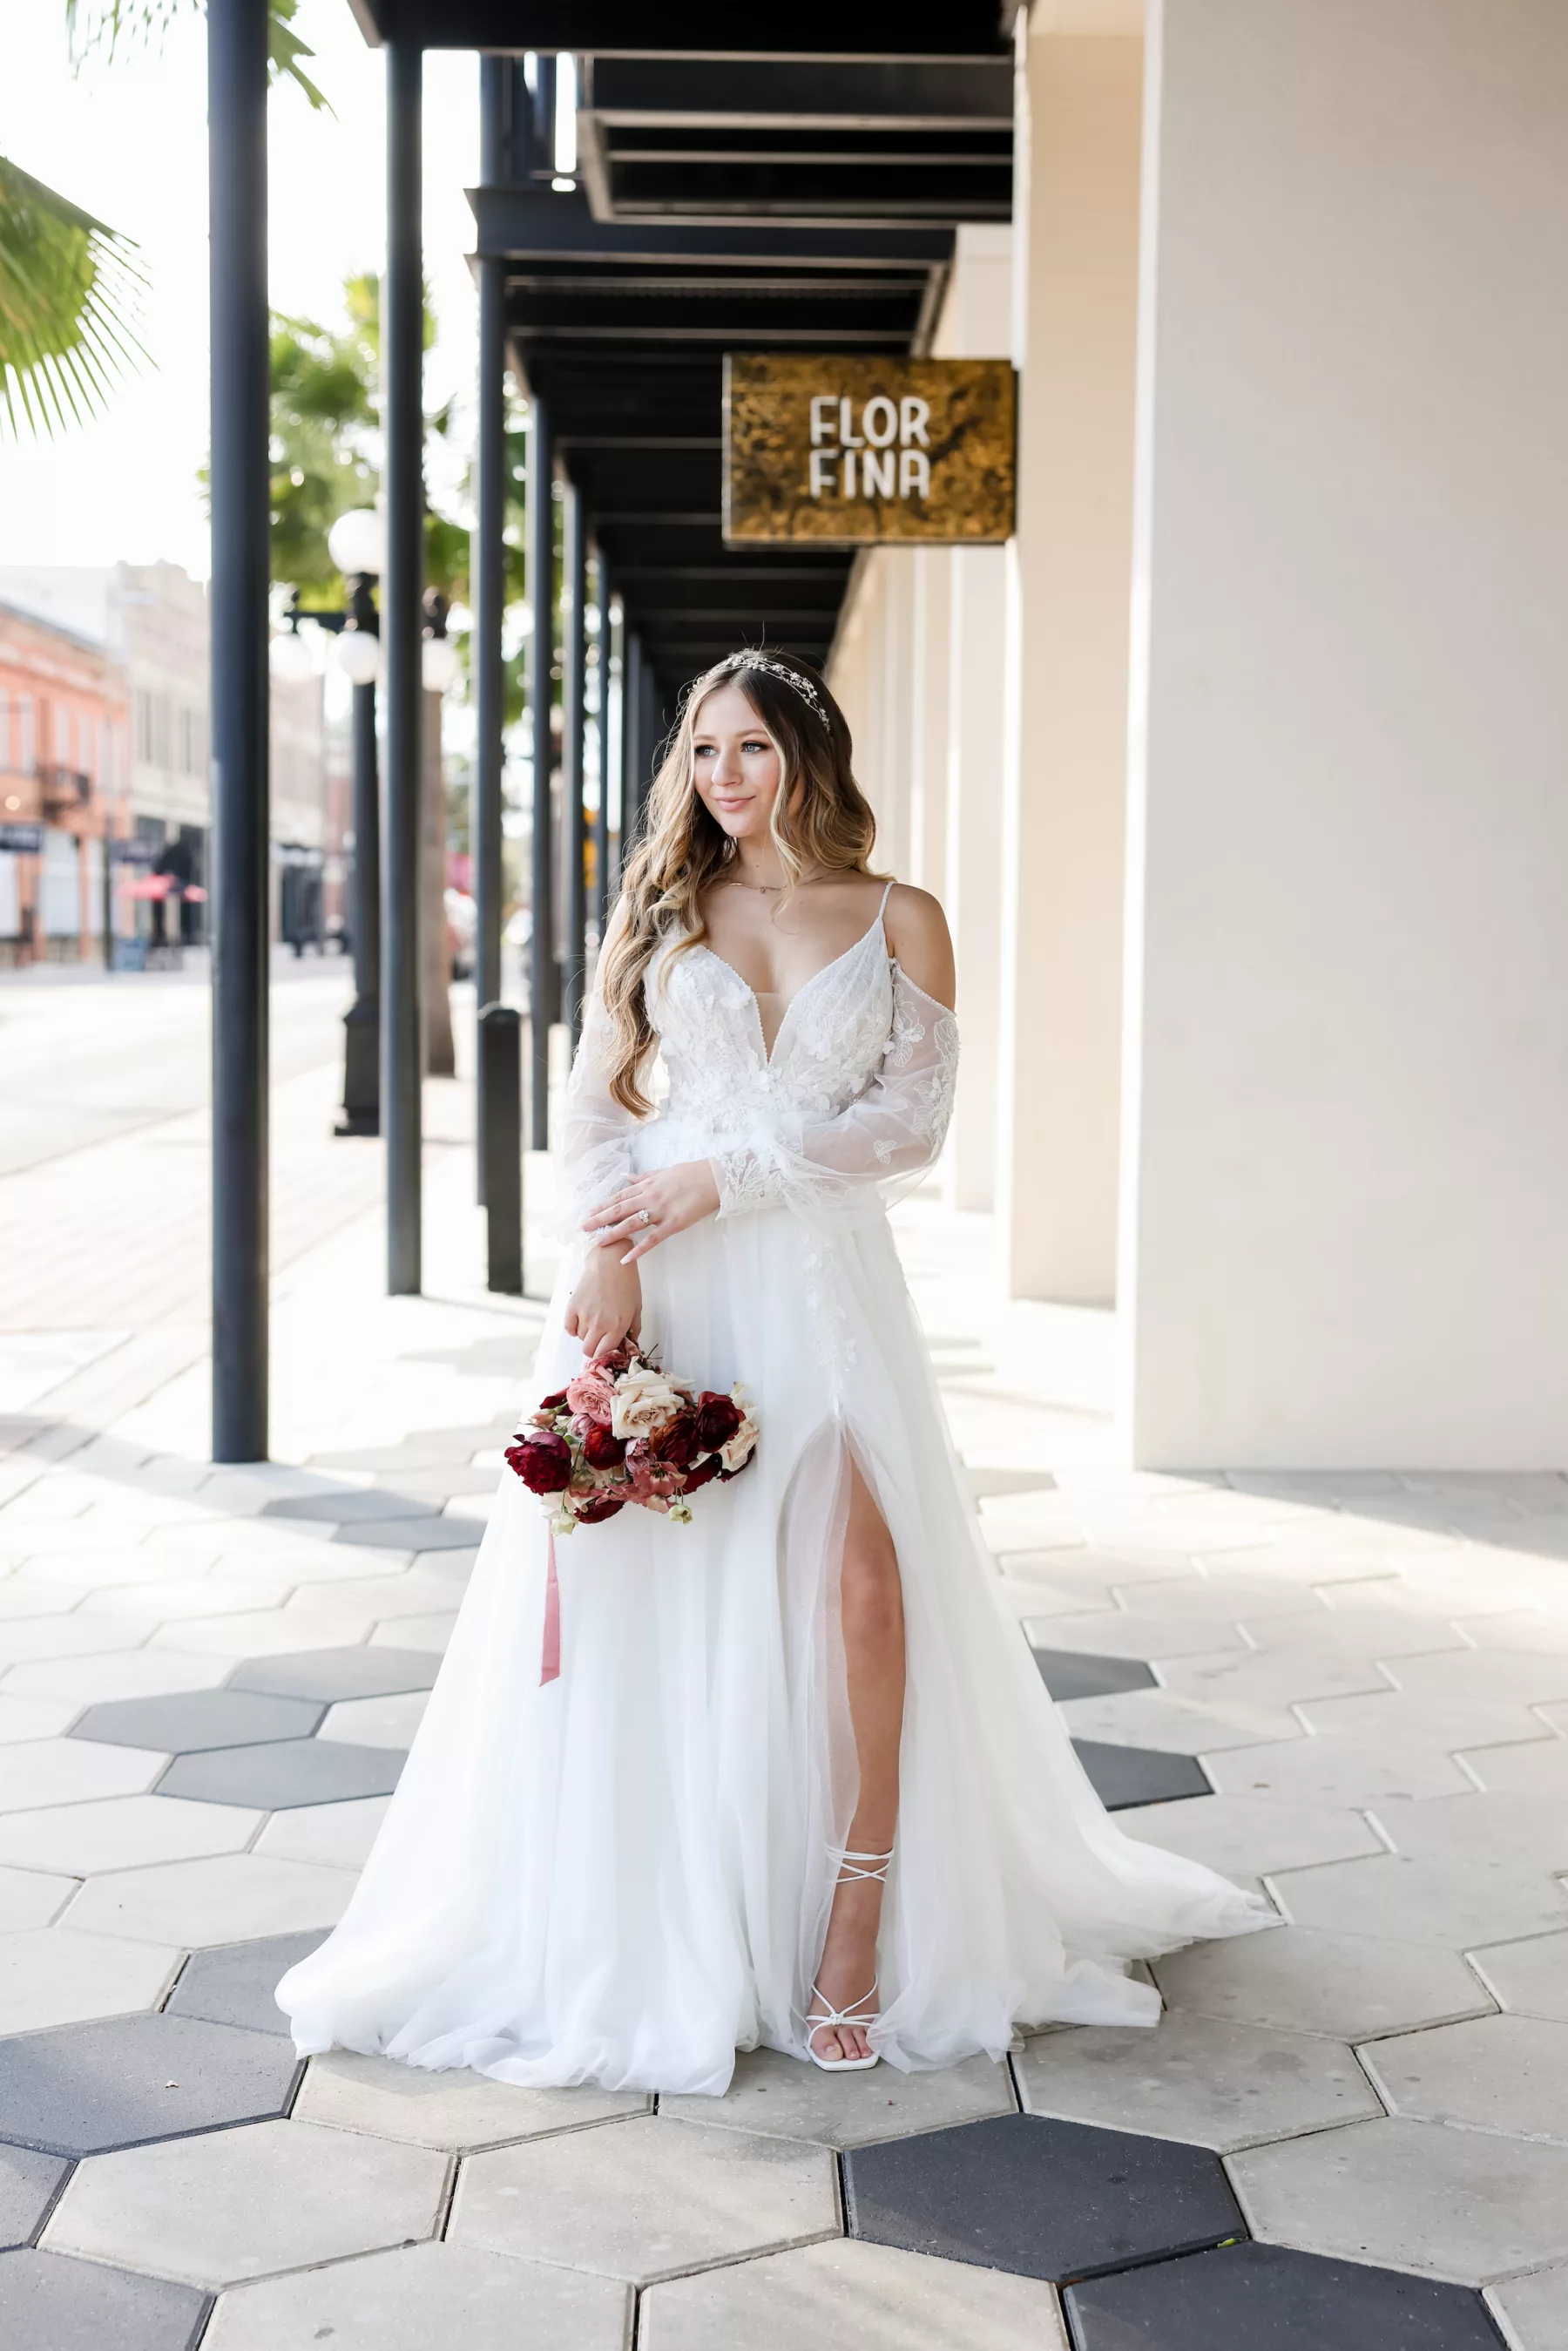 White Lace and Tulle Cold Shoulder A-Line Wedding Dress with High Slit Ideas | Boutique Truly Forever Bridal Tampa | Hair and Makeup Artist Adore Bridal Services | Photographer Lifelong Photography Studio